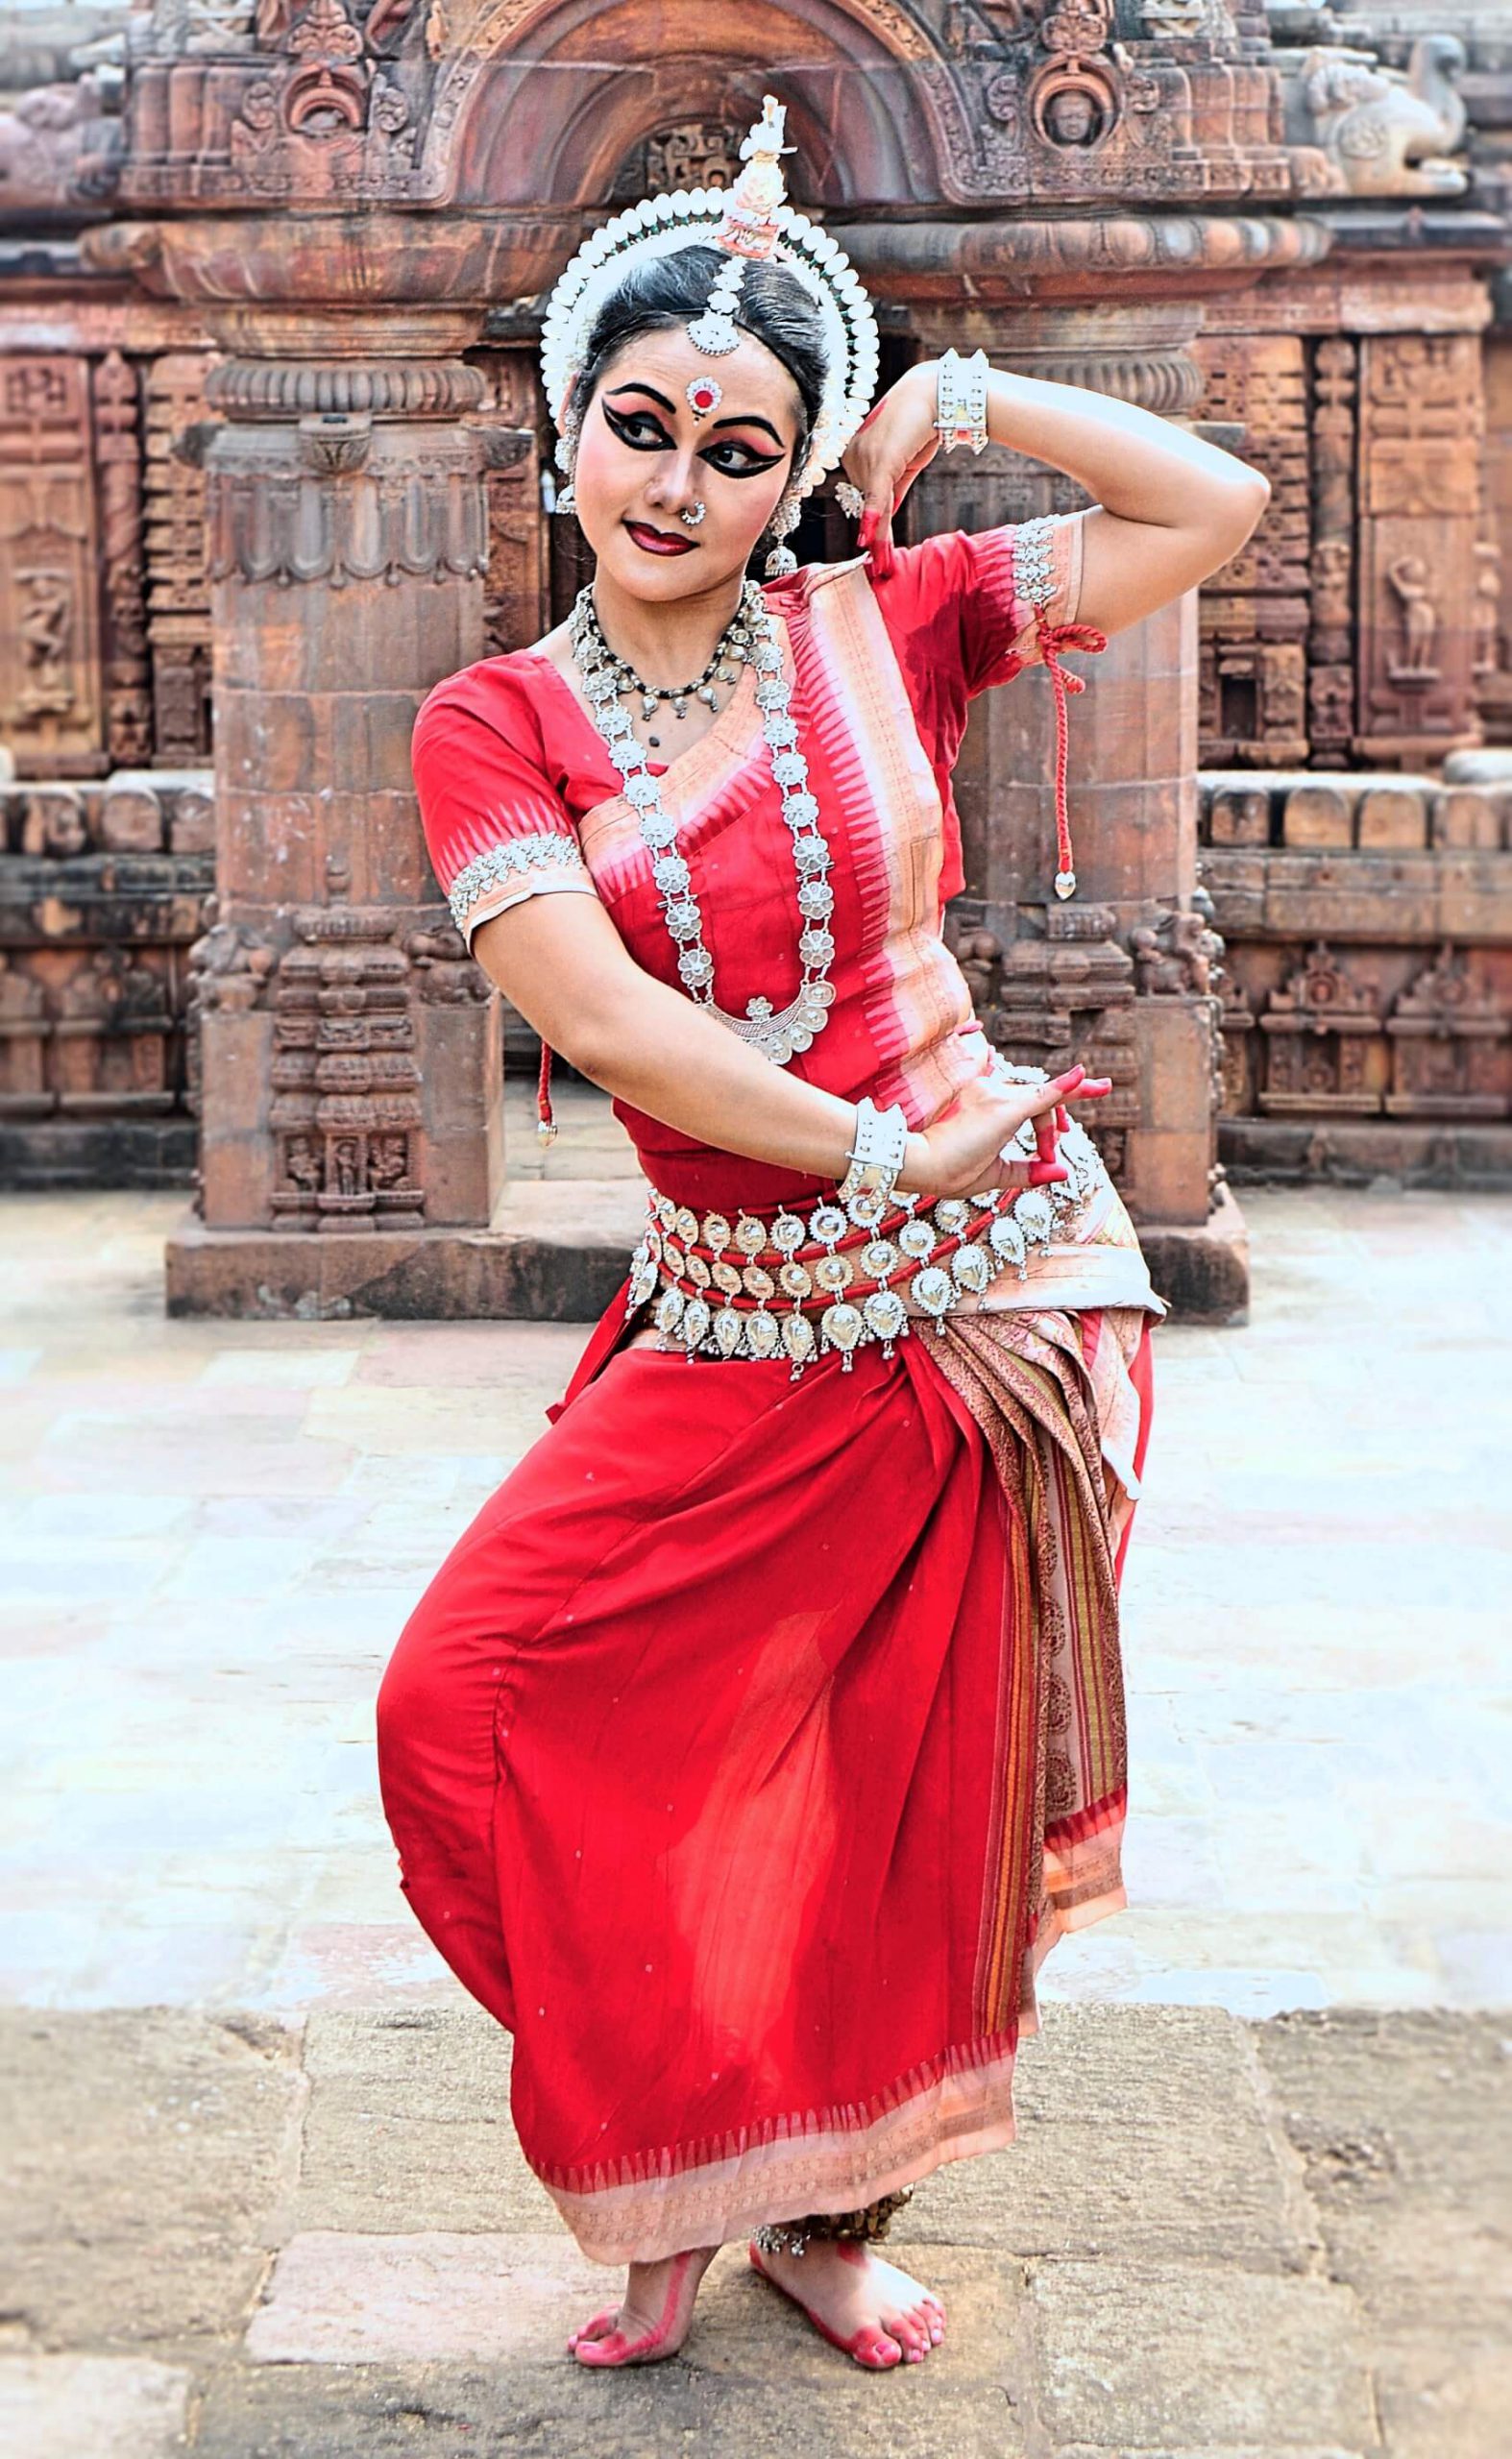 The soulful path of Yoga transversed by a classical dancer